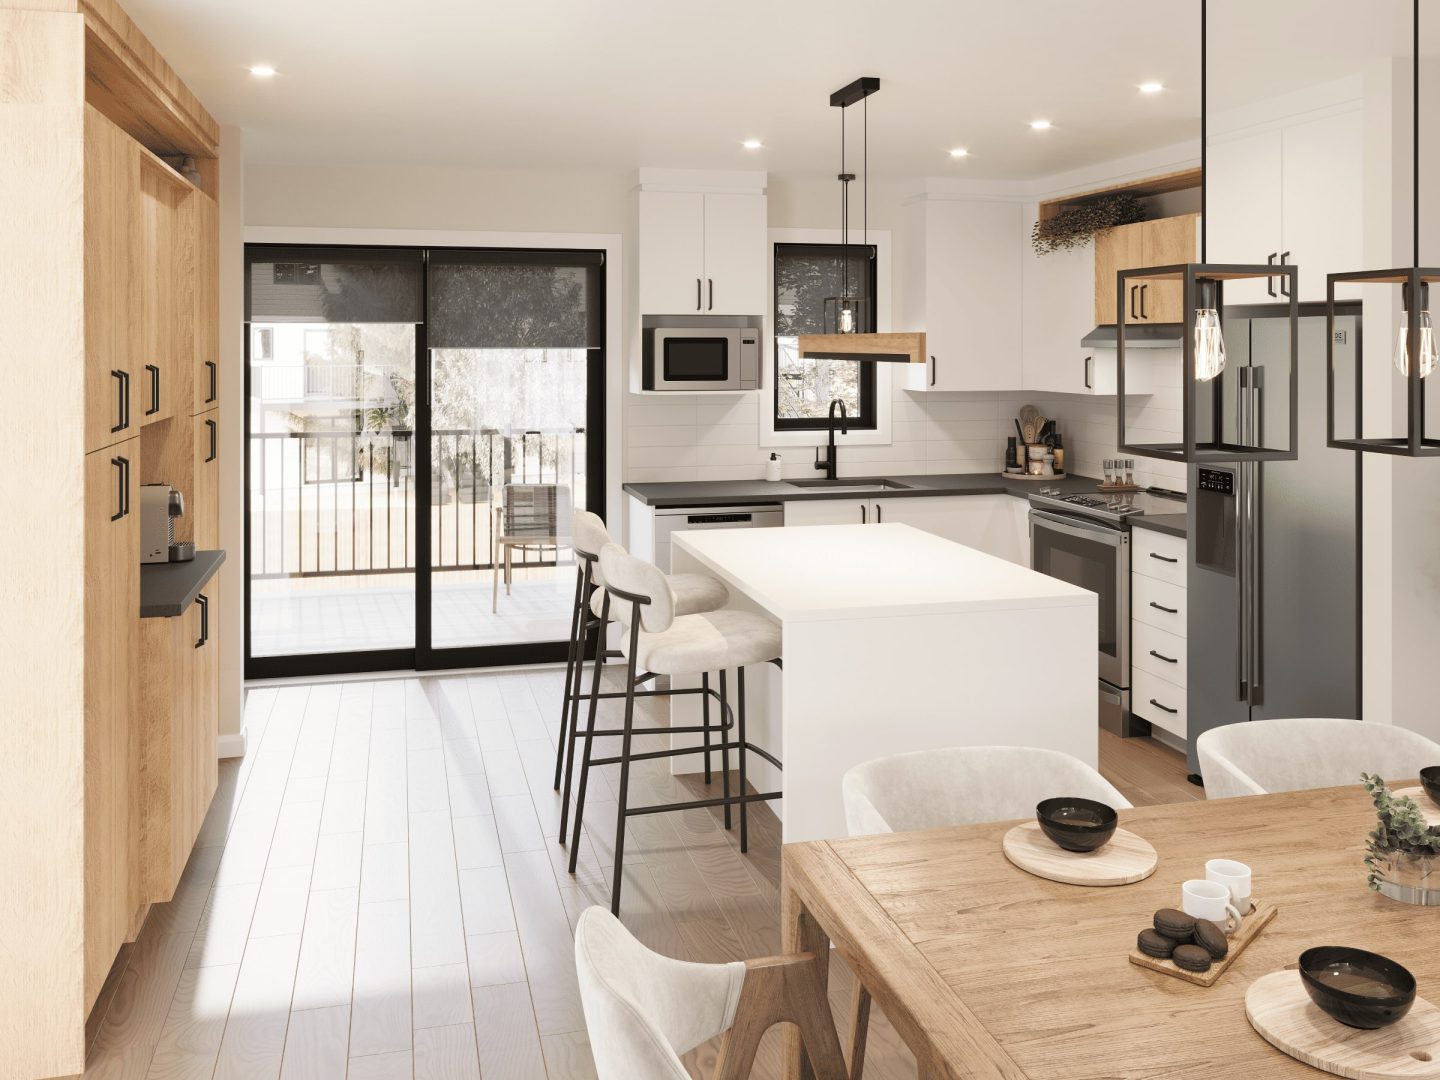 The Onesto model is a single-story townhouse in contemporary style. View from the kitchen.